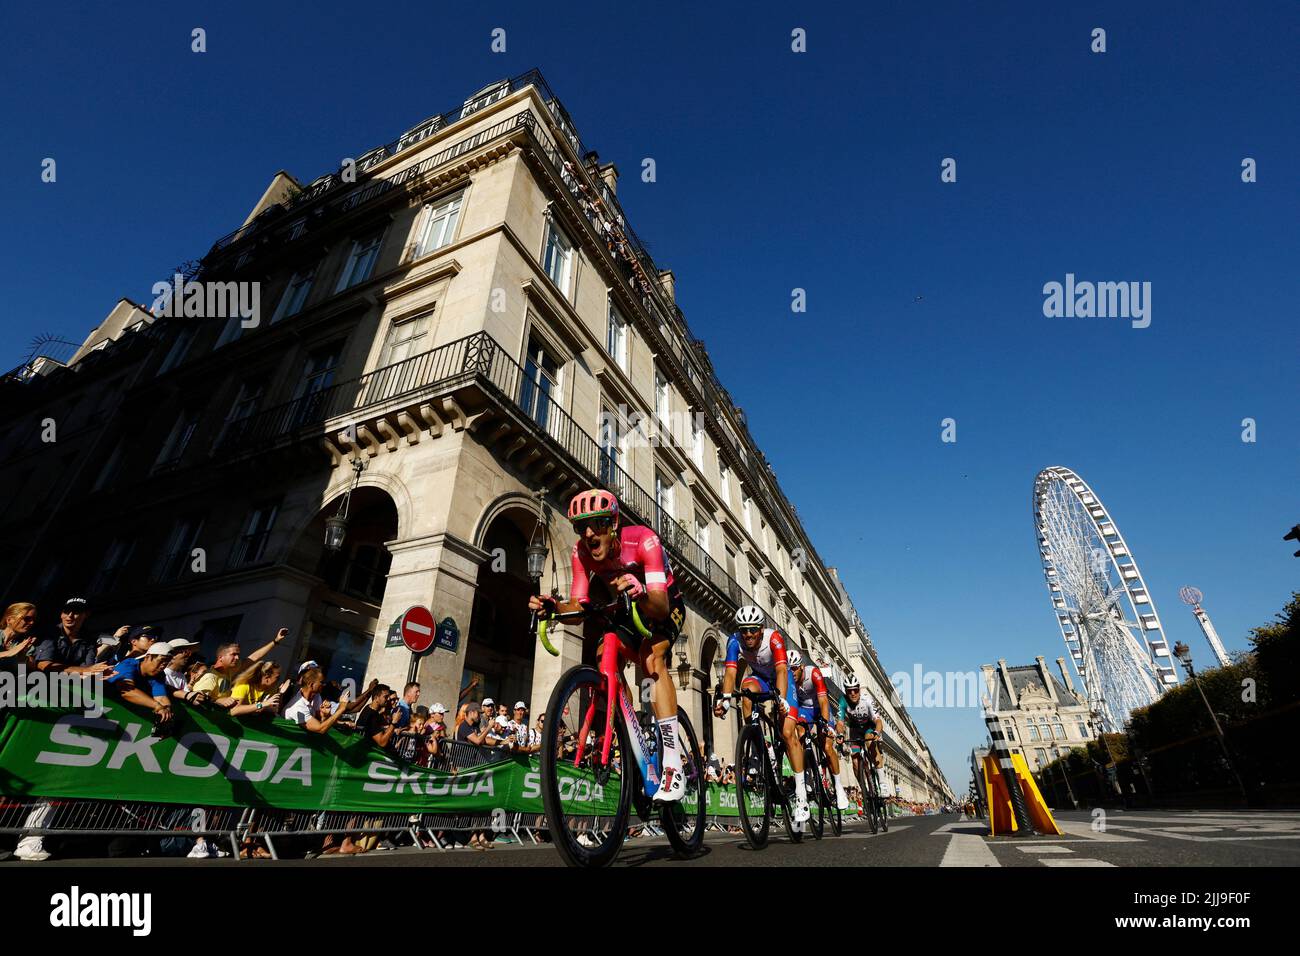 Cycling - Tour de France - Stage 21 - Paris La Defense Arena to Champs-Elysees - France - July 24, 2022 EF Education - Easypost's Jonas Rutsch in action with riders during stage 21 REUTERS/Gonzalo Fuentes Stock Photo